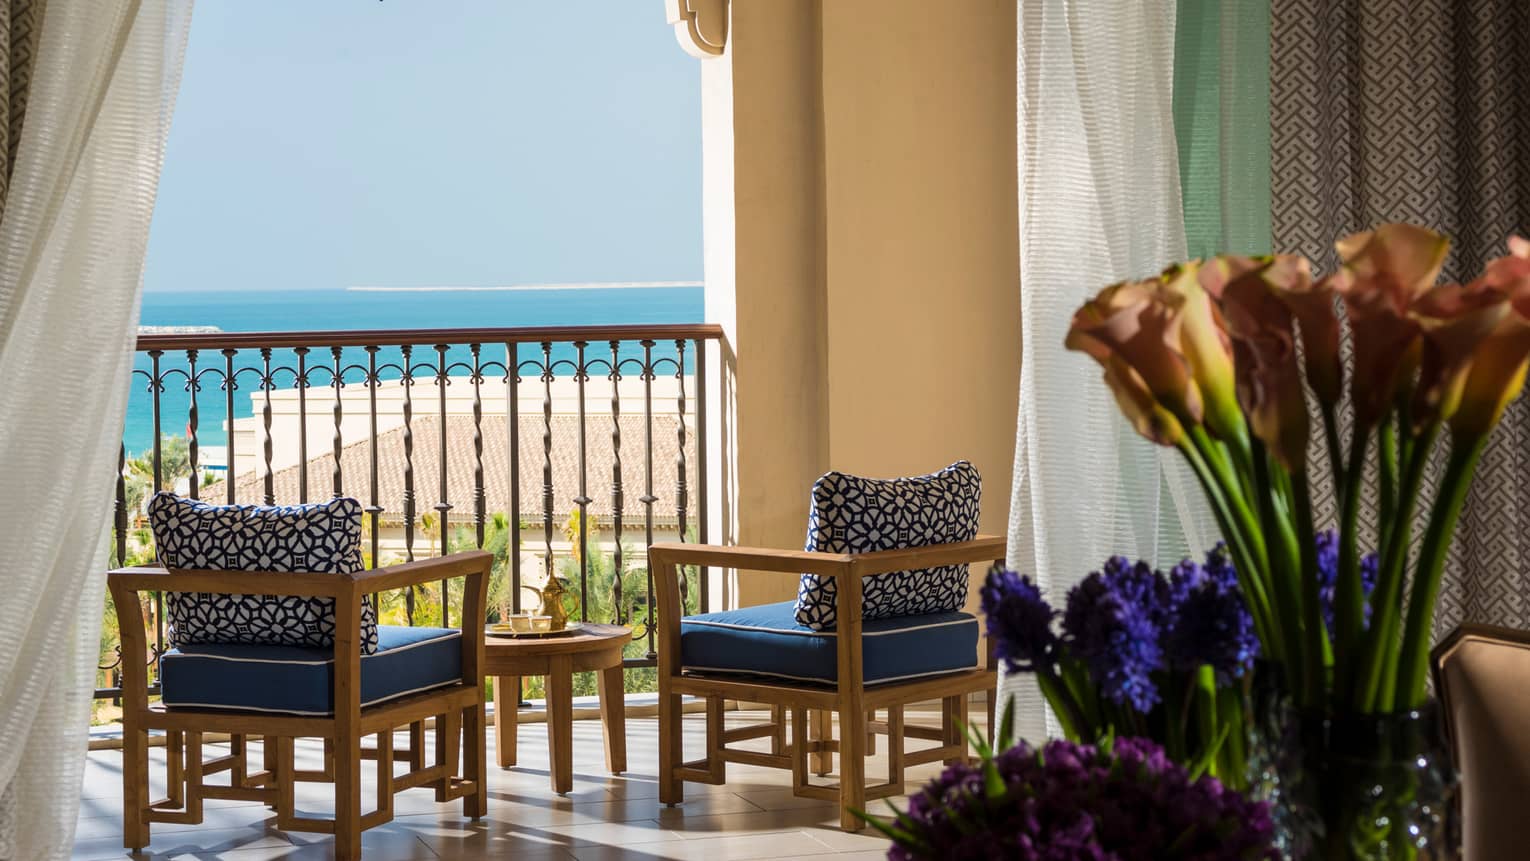 Imperial Suite with blue and purple flowers, sunny balcony with wood furniture, blue cushions